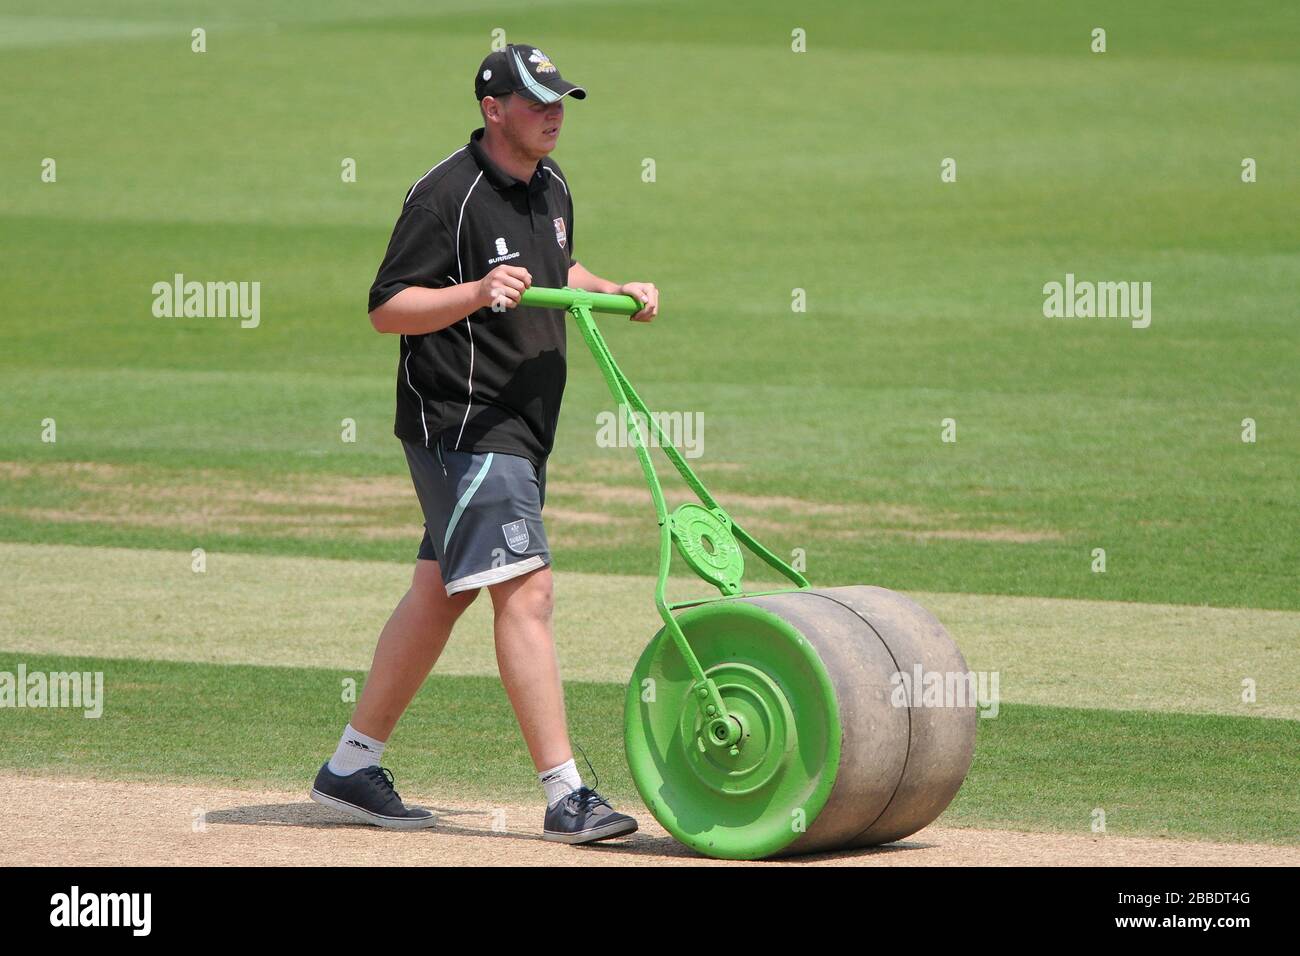 Groundstaff use a roller to tend to the wicket before the start of the days play Stock Photo